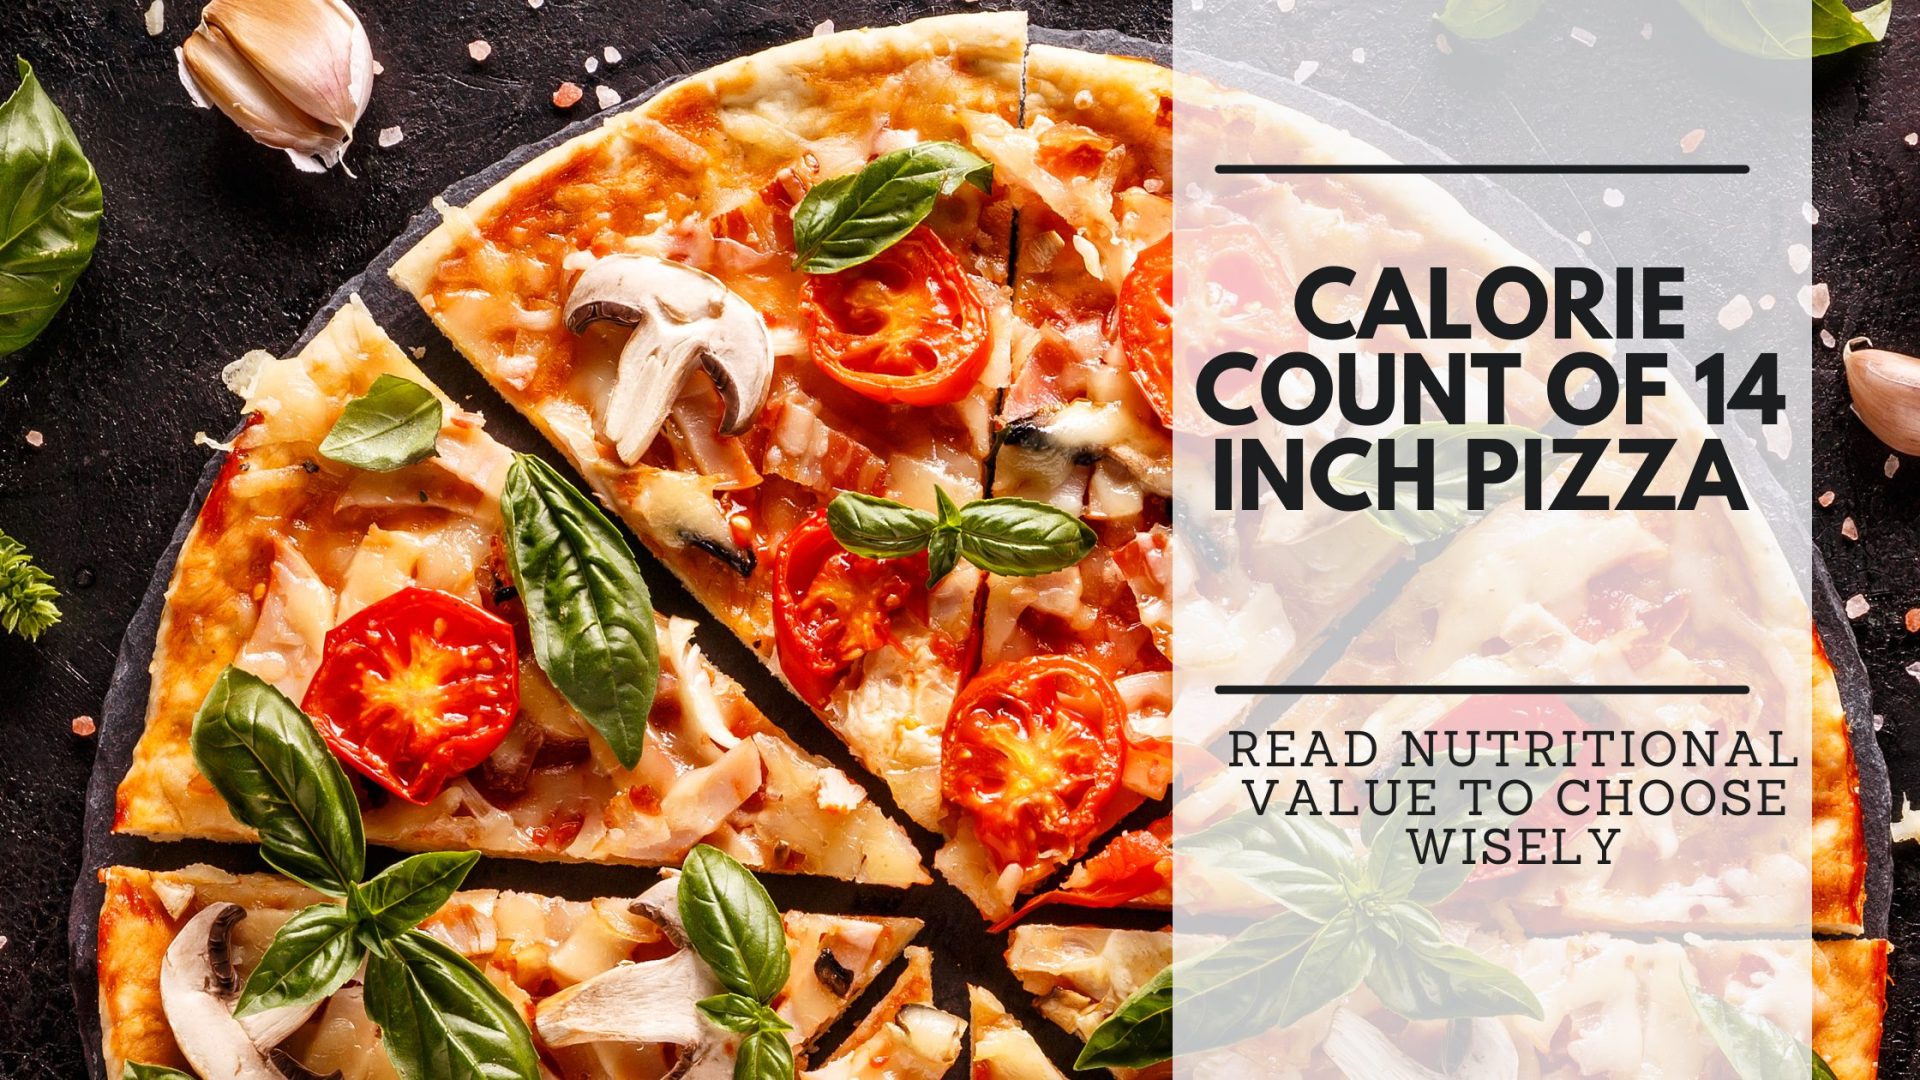 How Many Calories in a 14 Inch Pizza? Indulge in Guilt-Free Pleasure